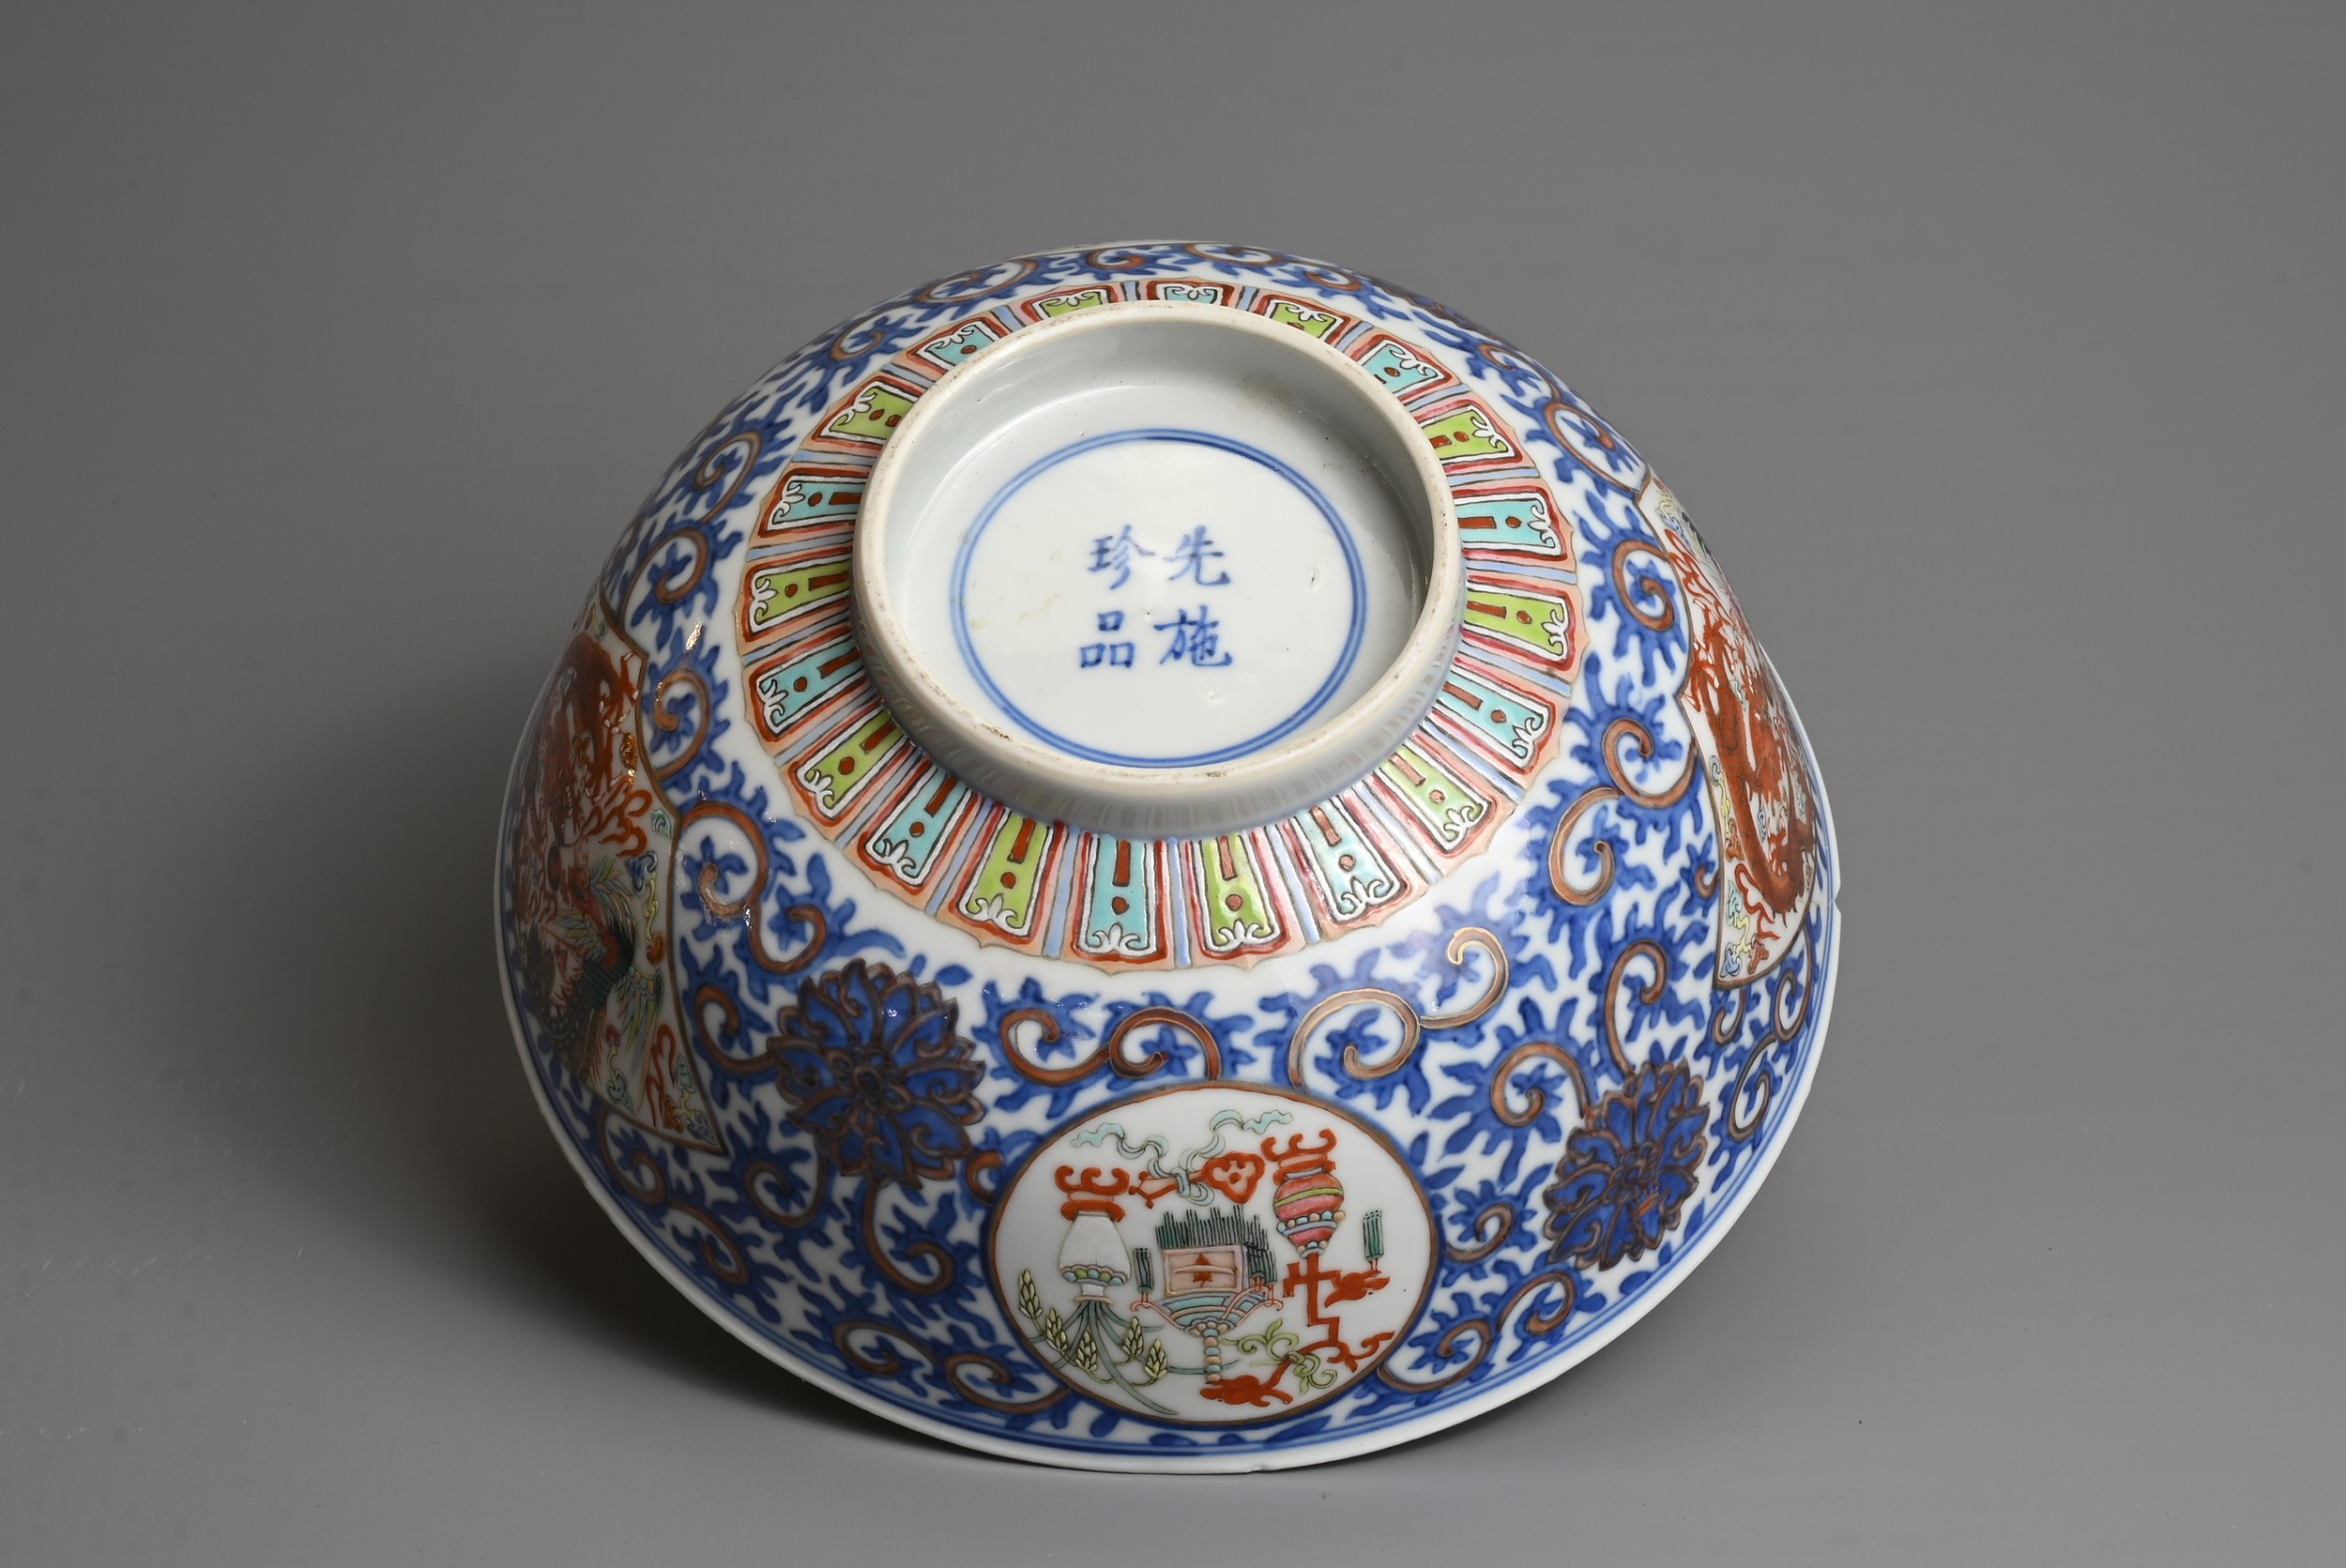 A CHINESE BLUE AND WHITE AND ENAMEL DECORATED PORCELAIN BOWL, LATE QING DYNASTY. Decorated with - Image 6 of 8